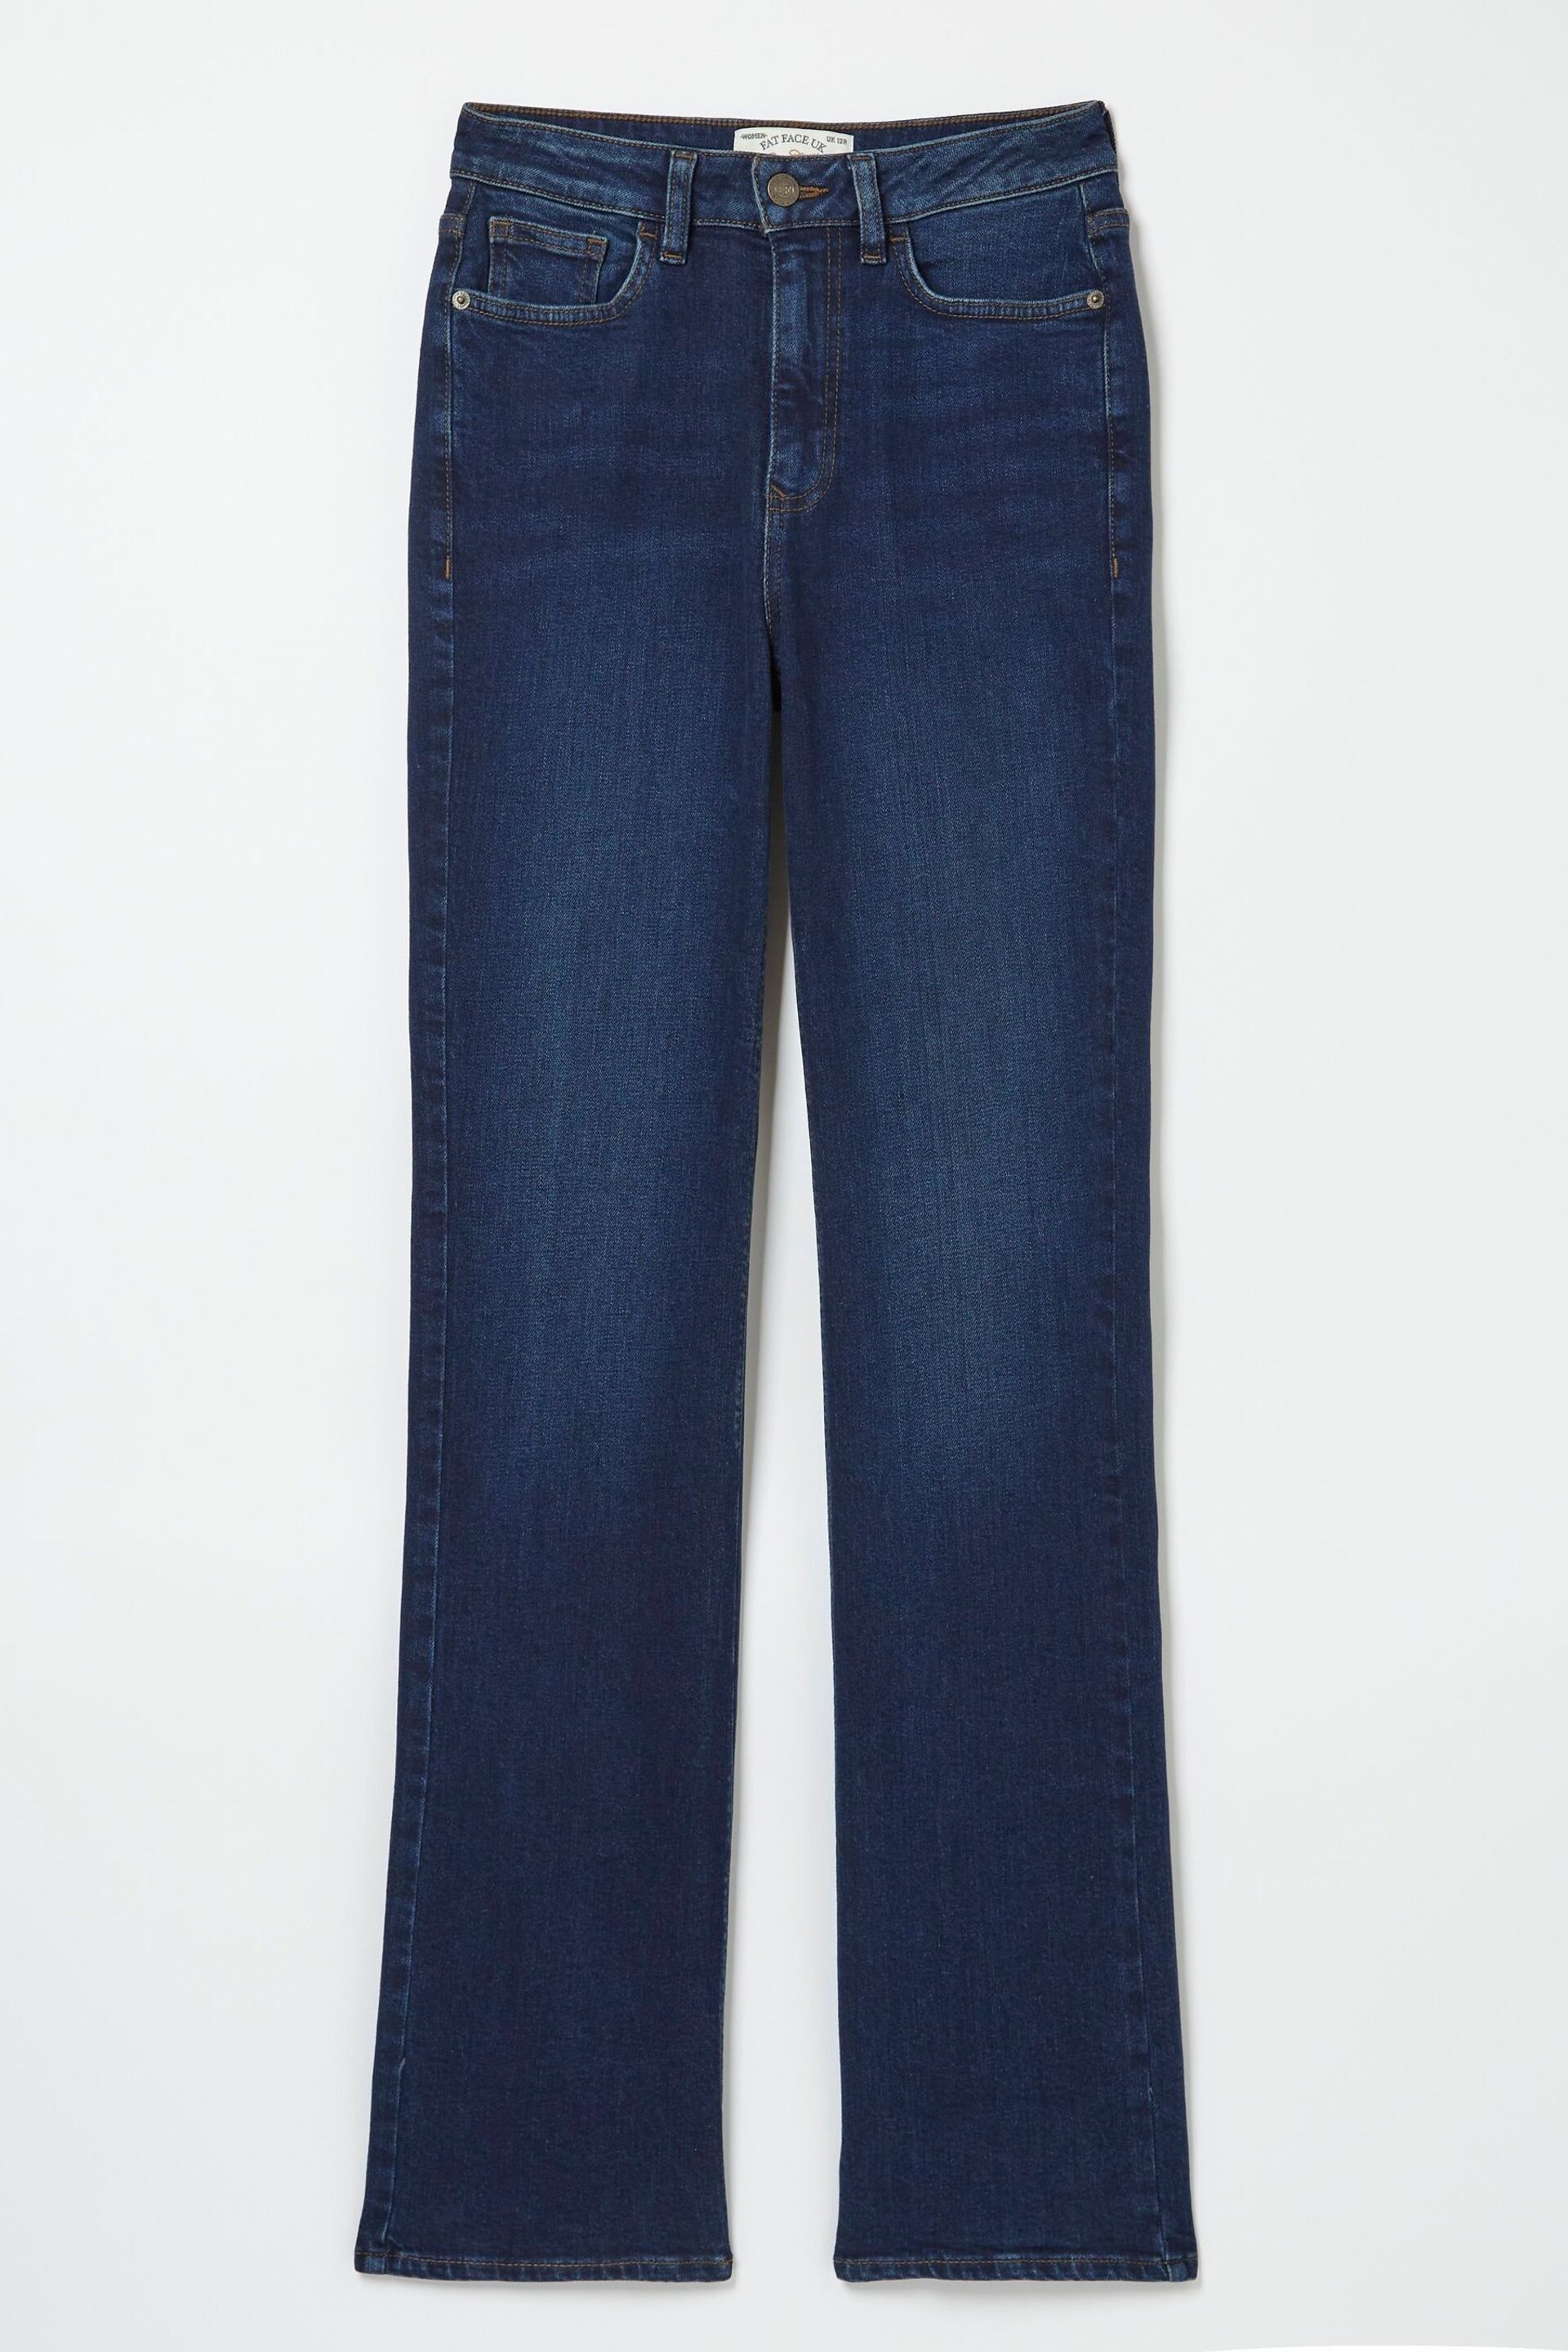 FatFace Blue Brooke Bootcut Jeans - Image 5 of 5